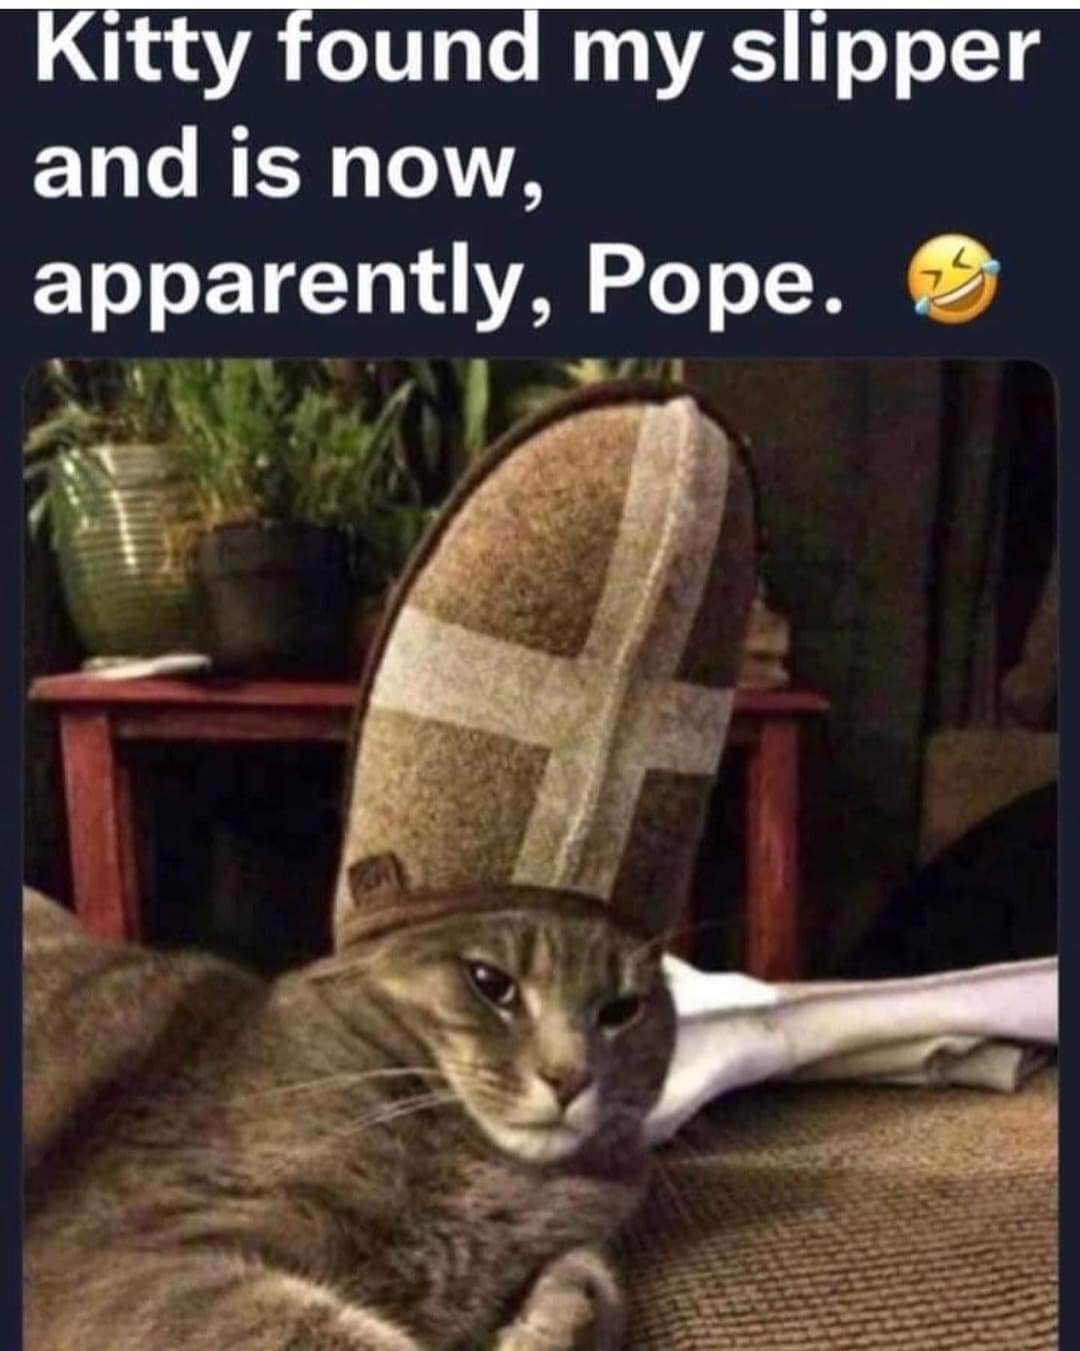 kitty found my slipper and is now apparently, pope